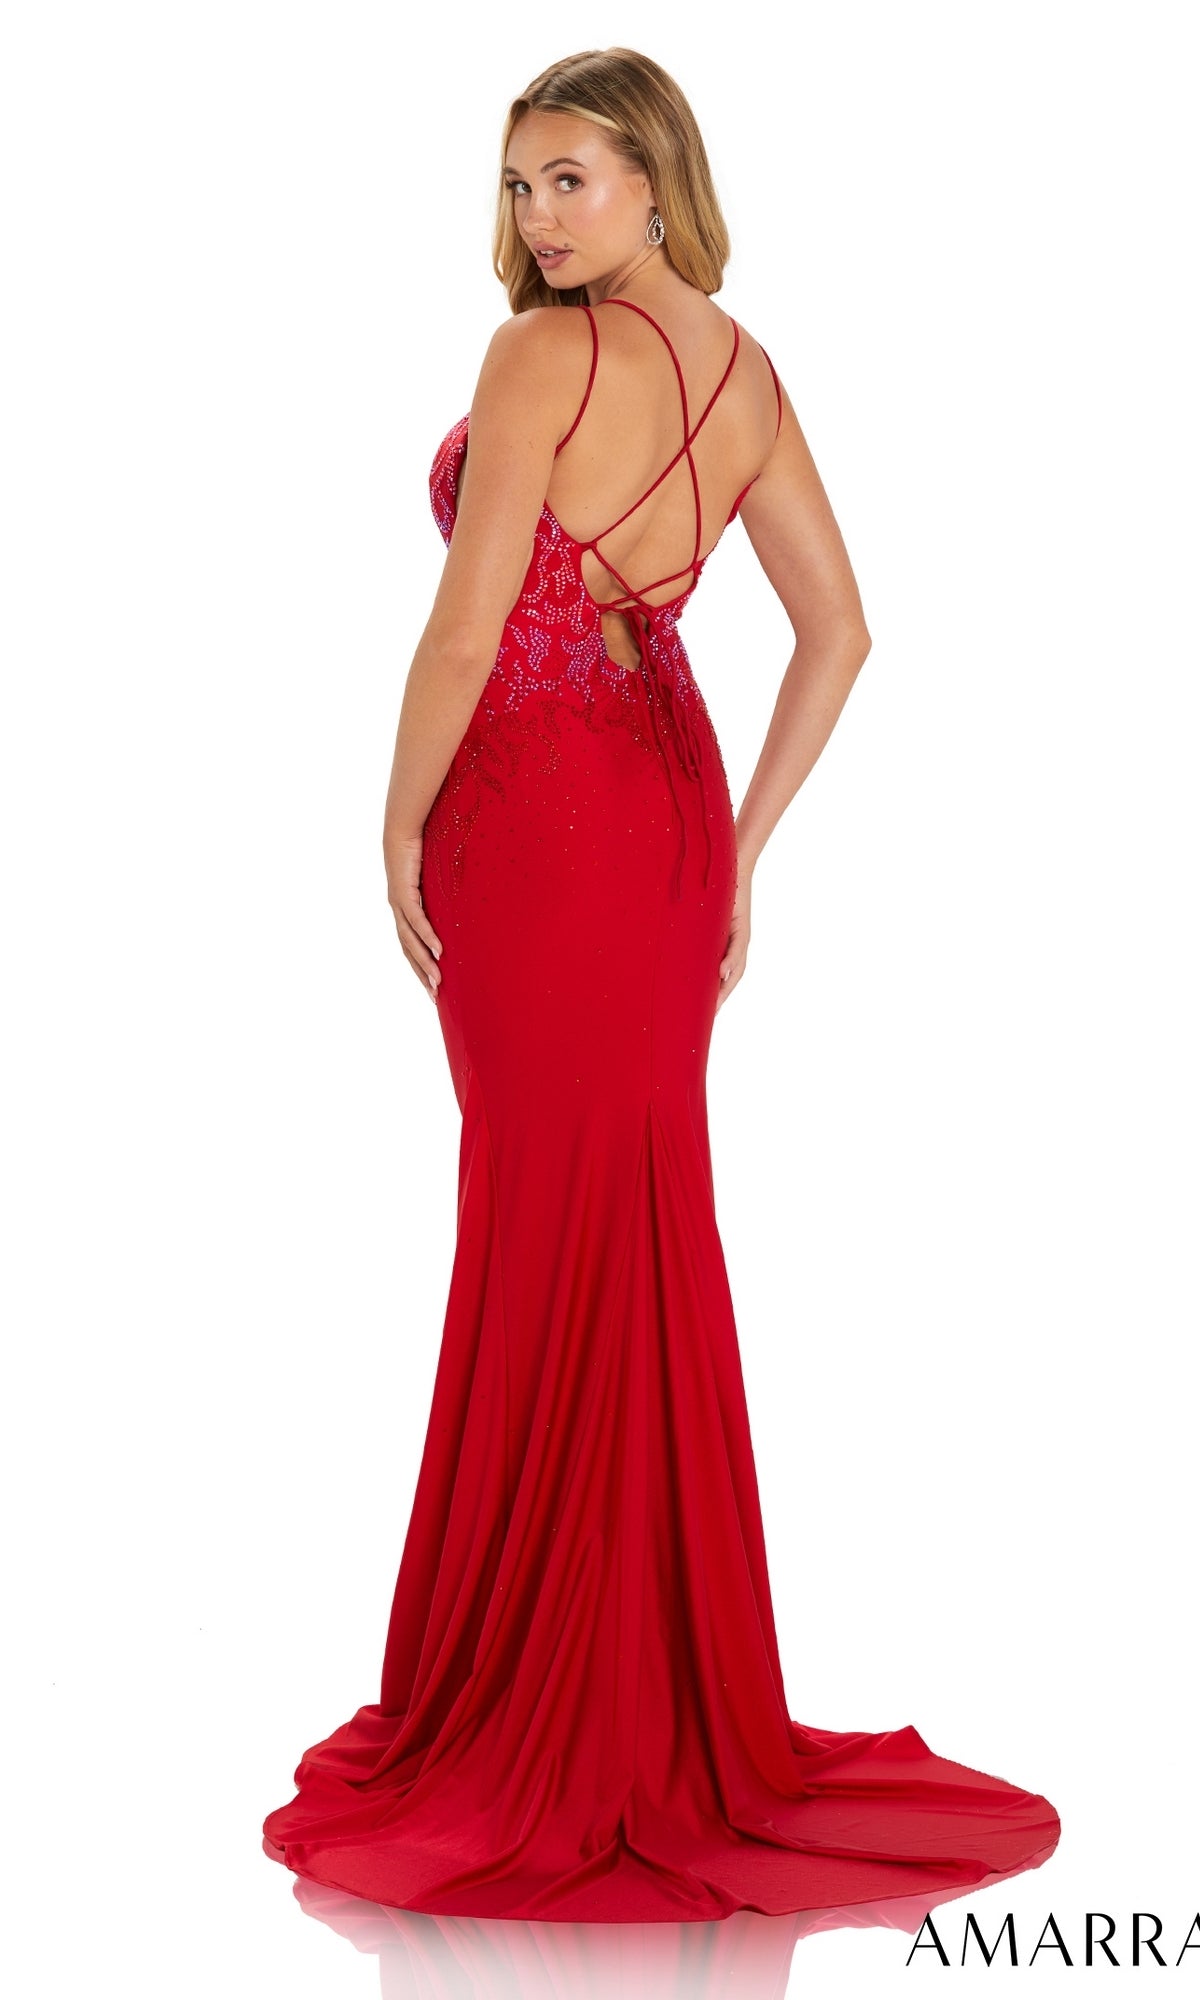 Amarra Backless Long Jersey Prom Dress with Beads